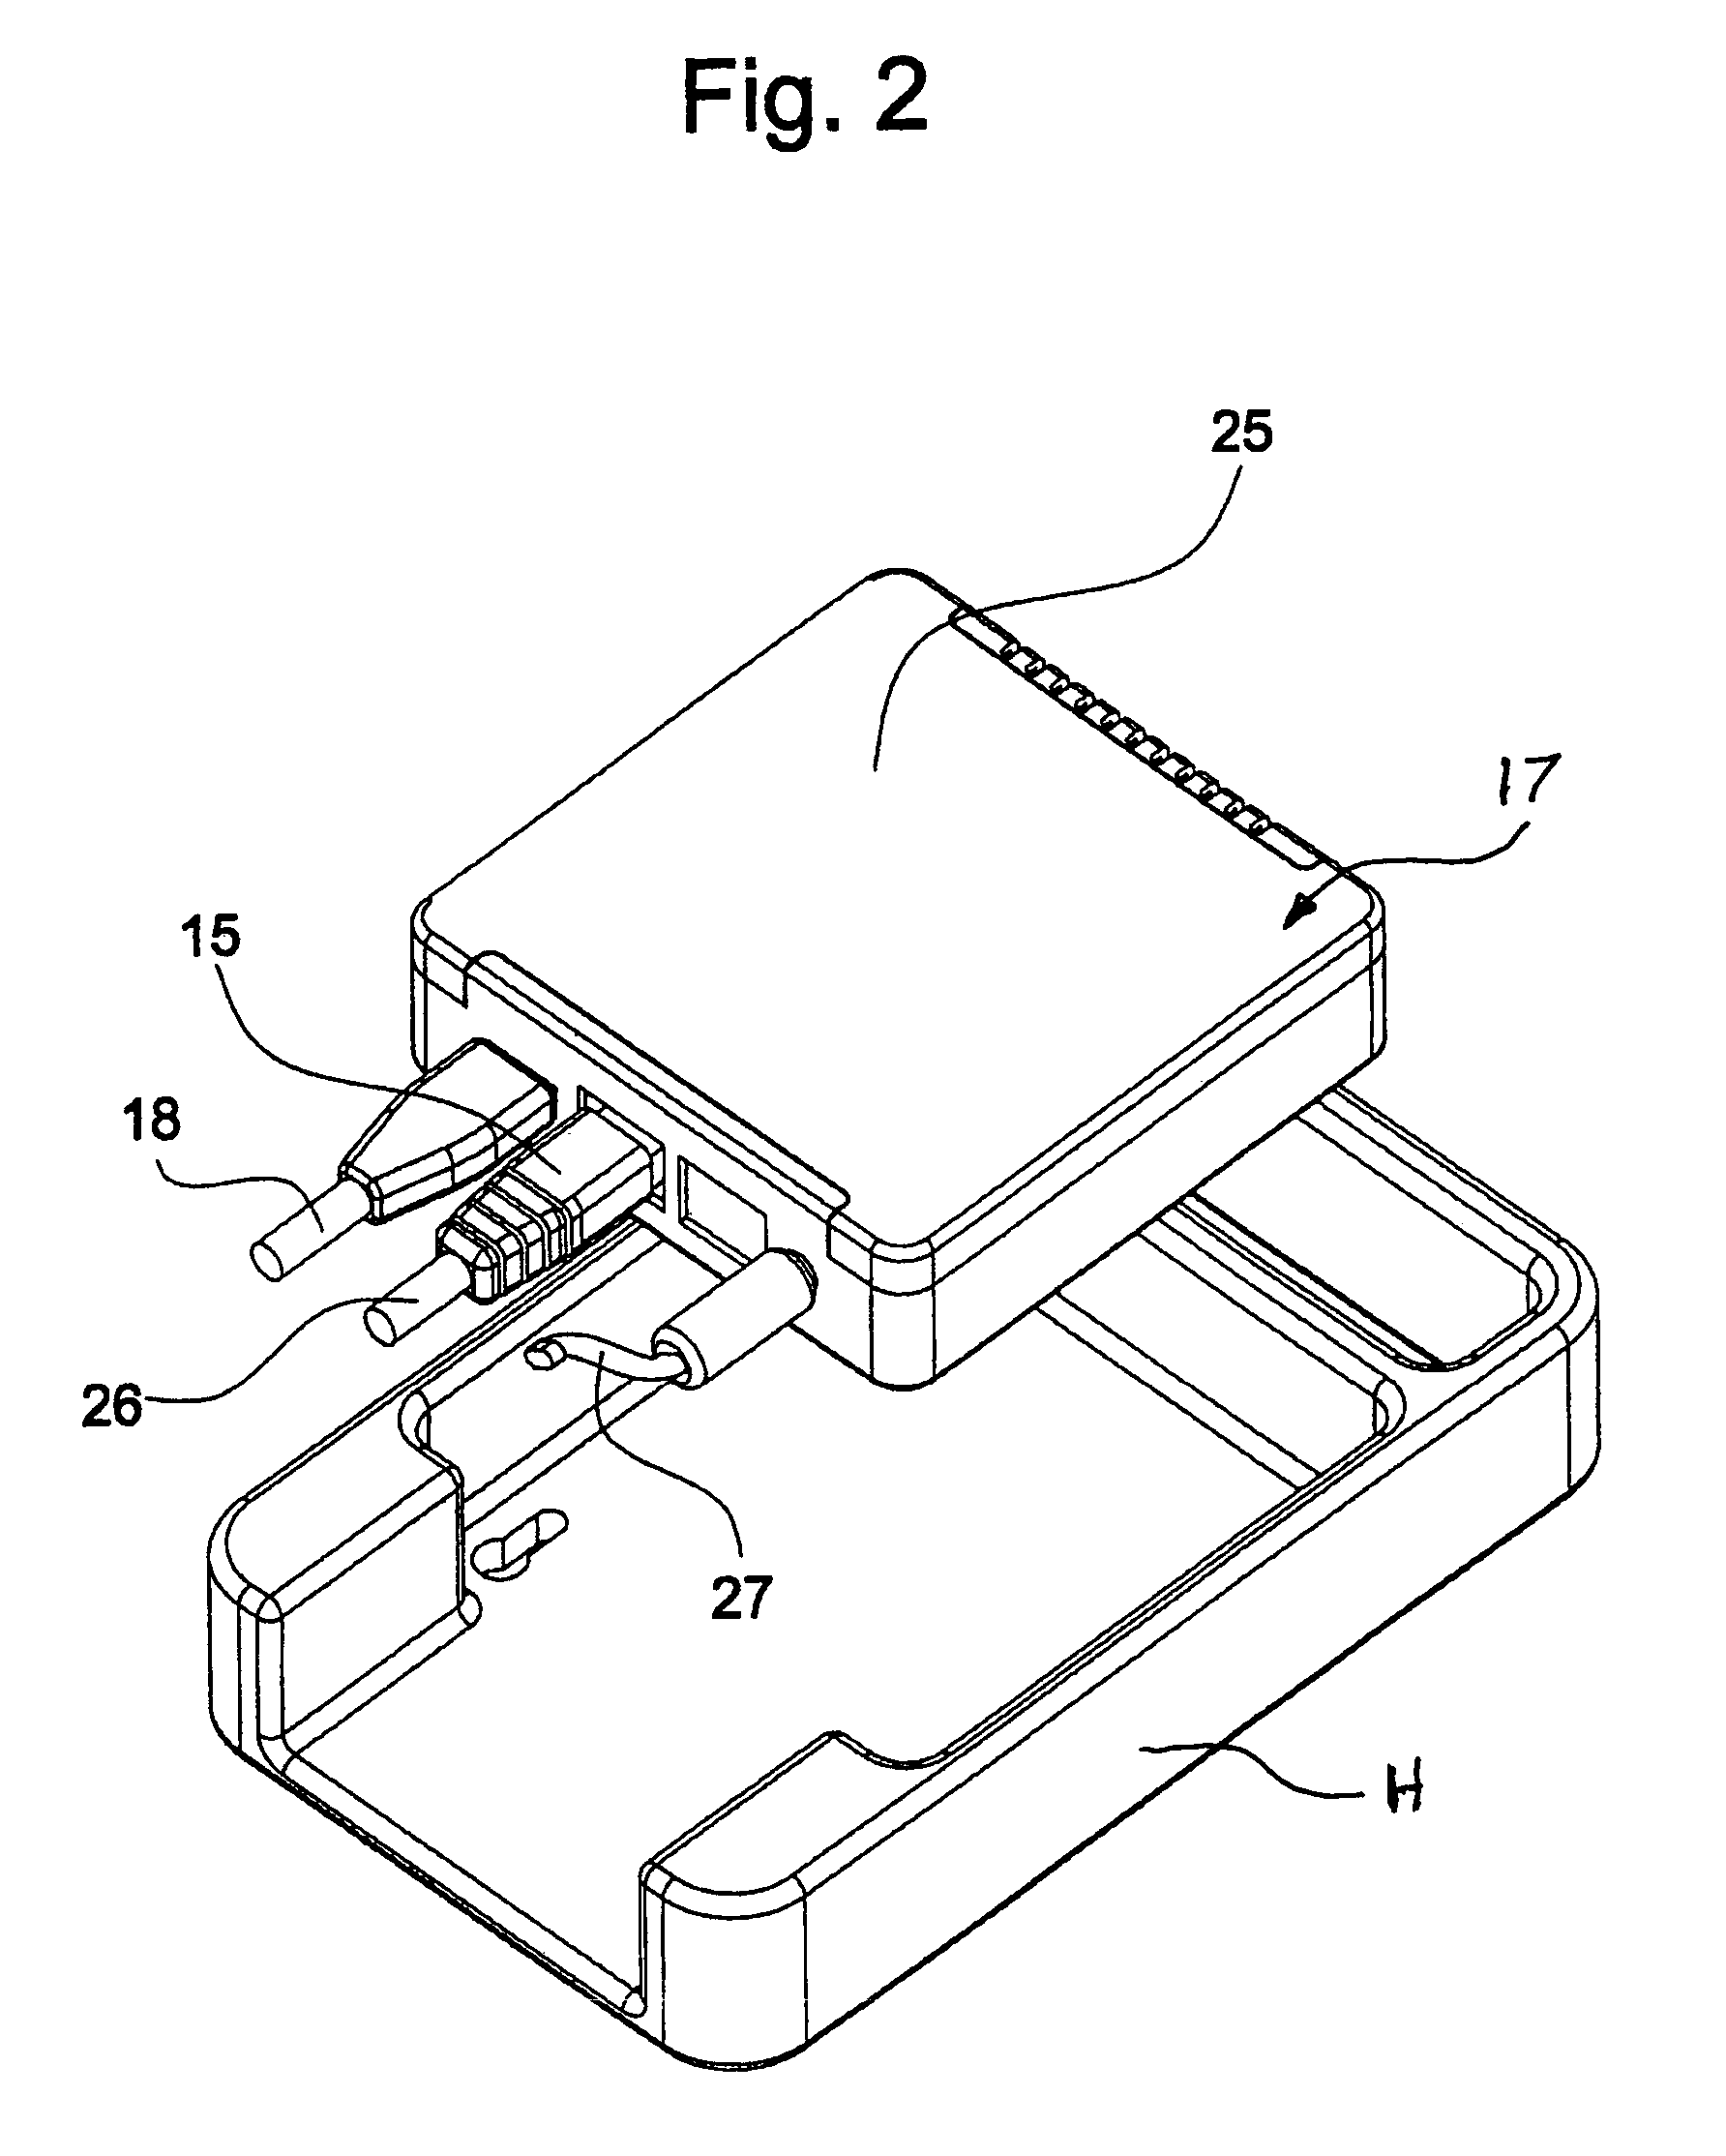 Device and method for remote maintenance of an elevator